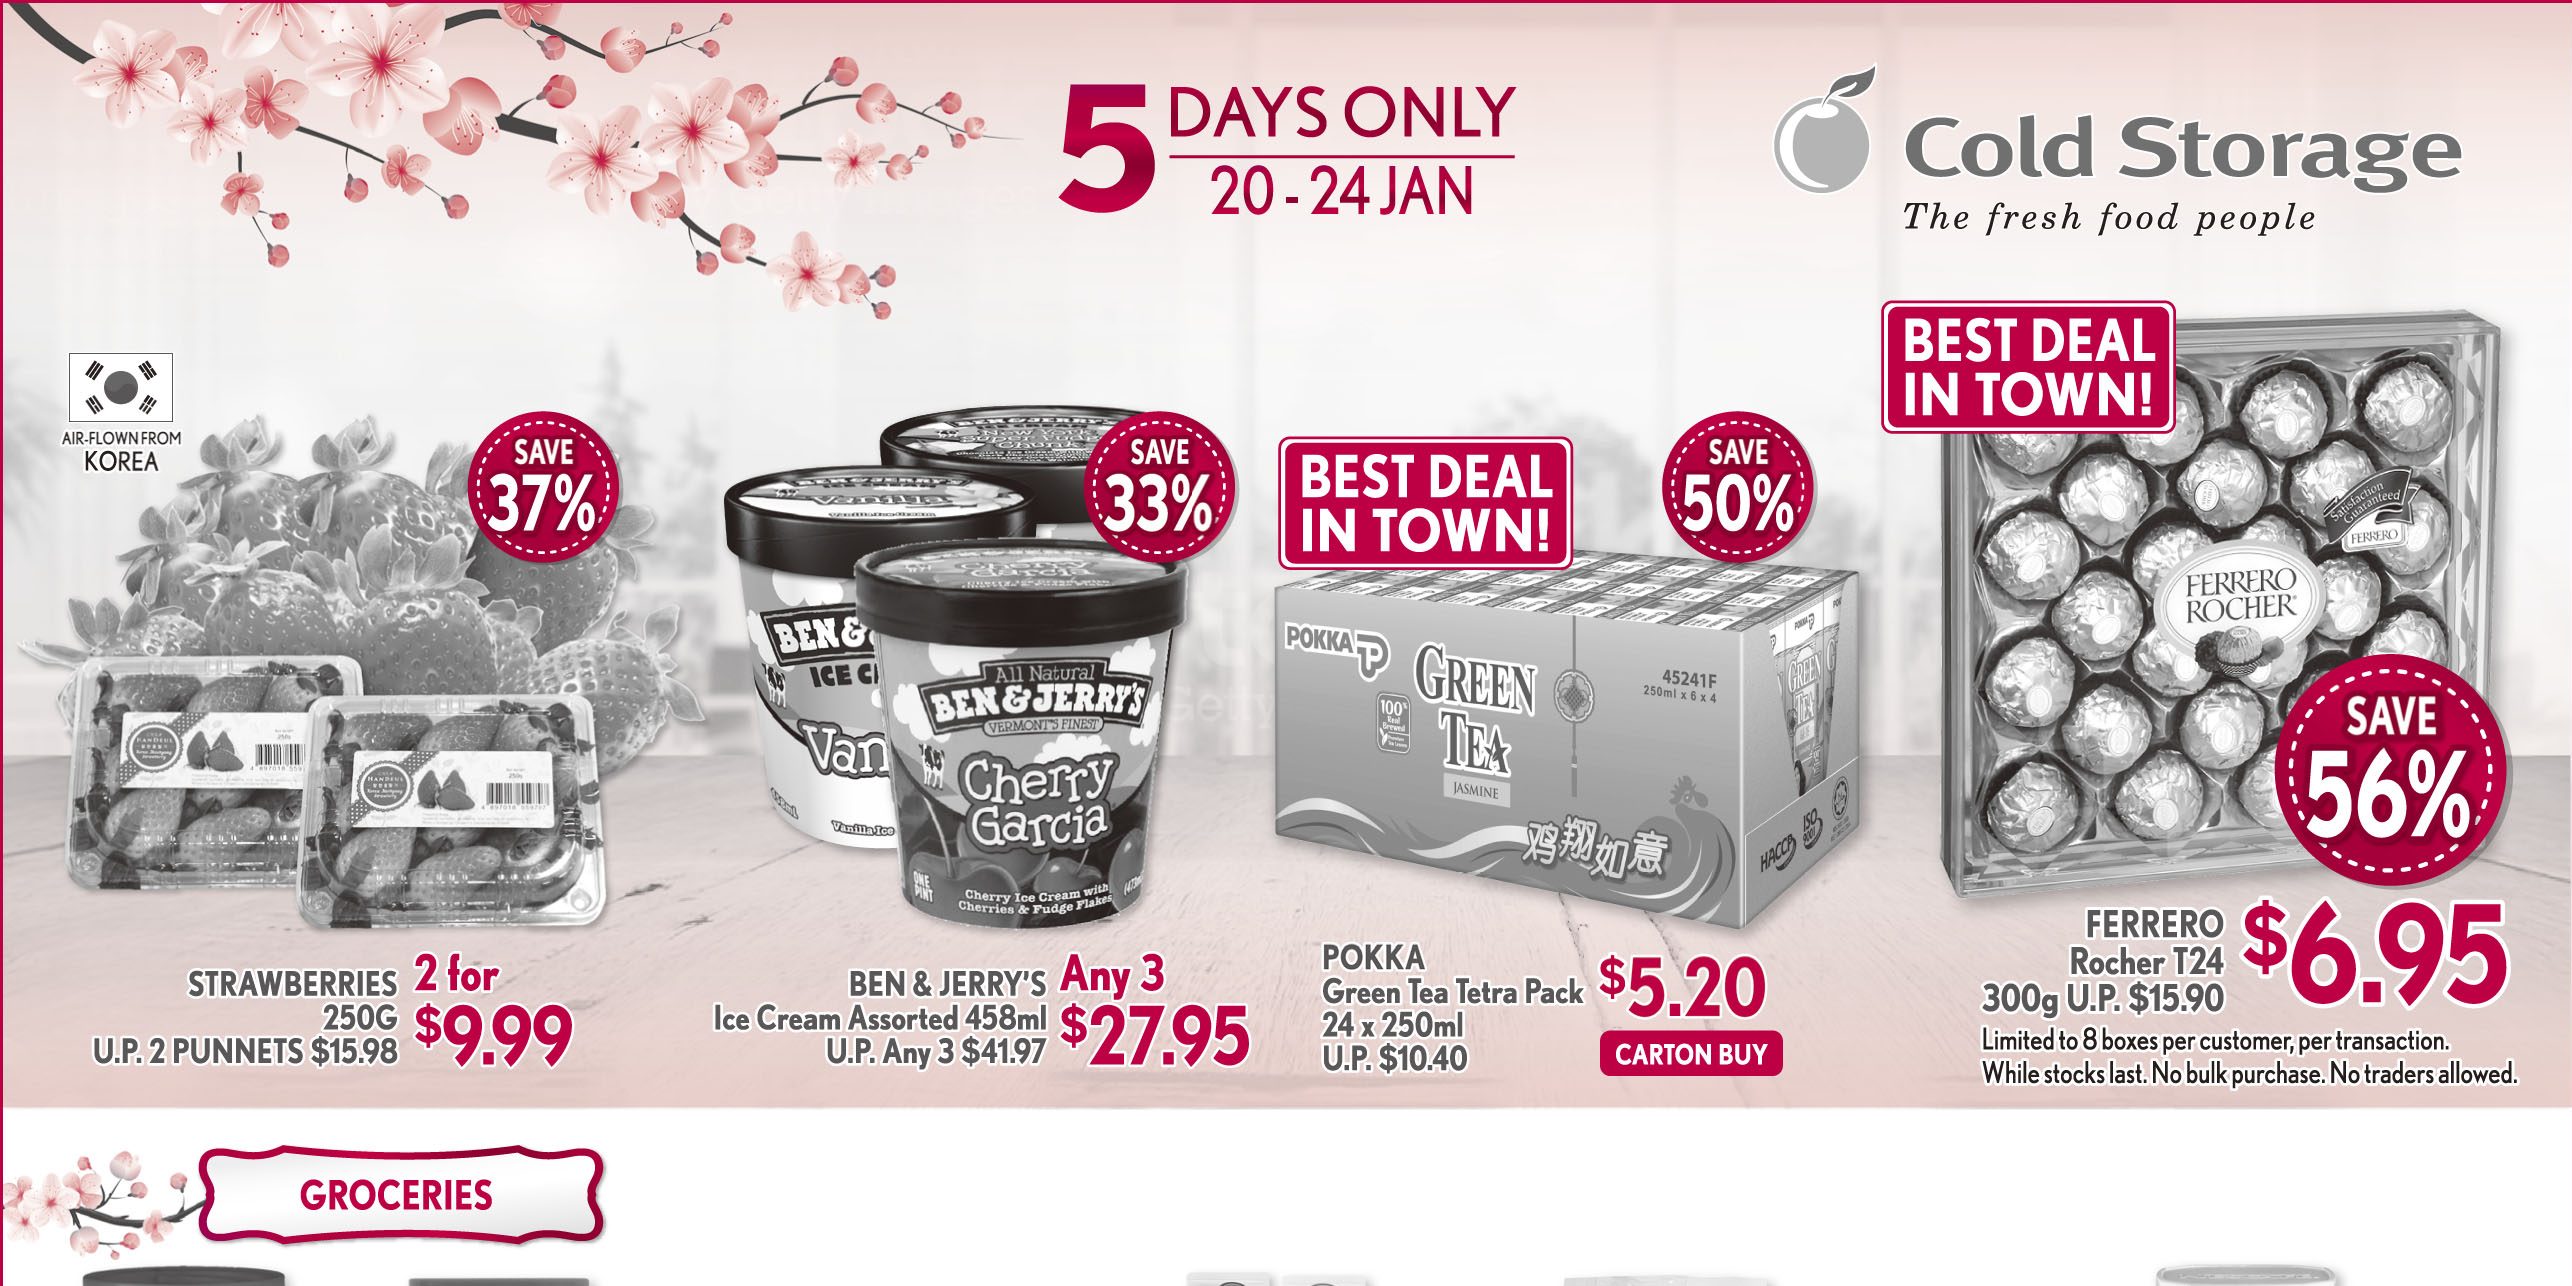 Cold Storage Singapore 5 Days Only Promotion 20-24 Jan 2017